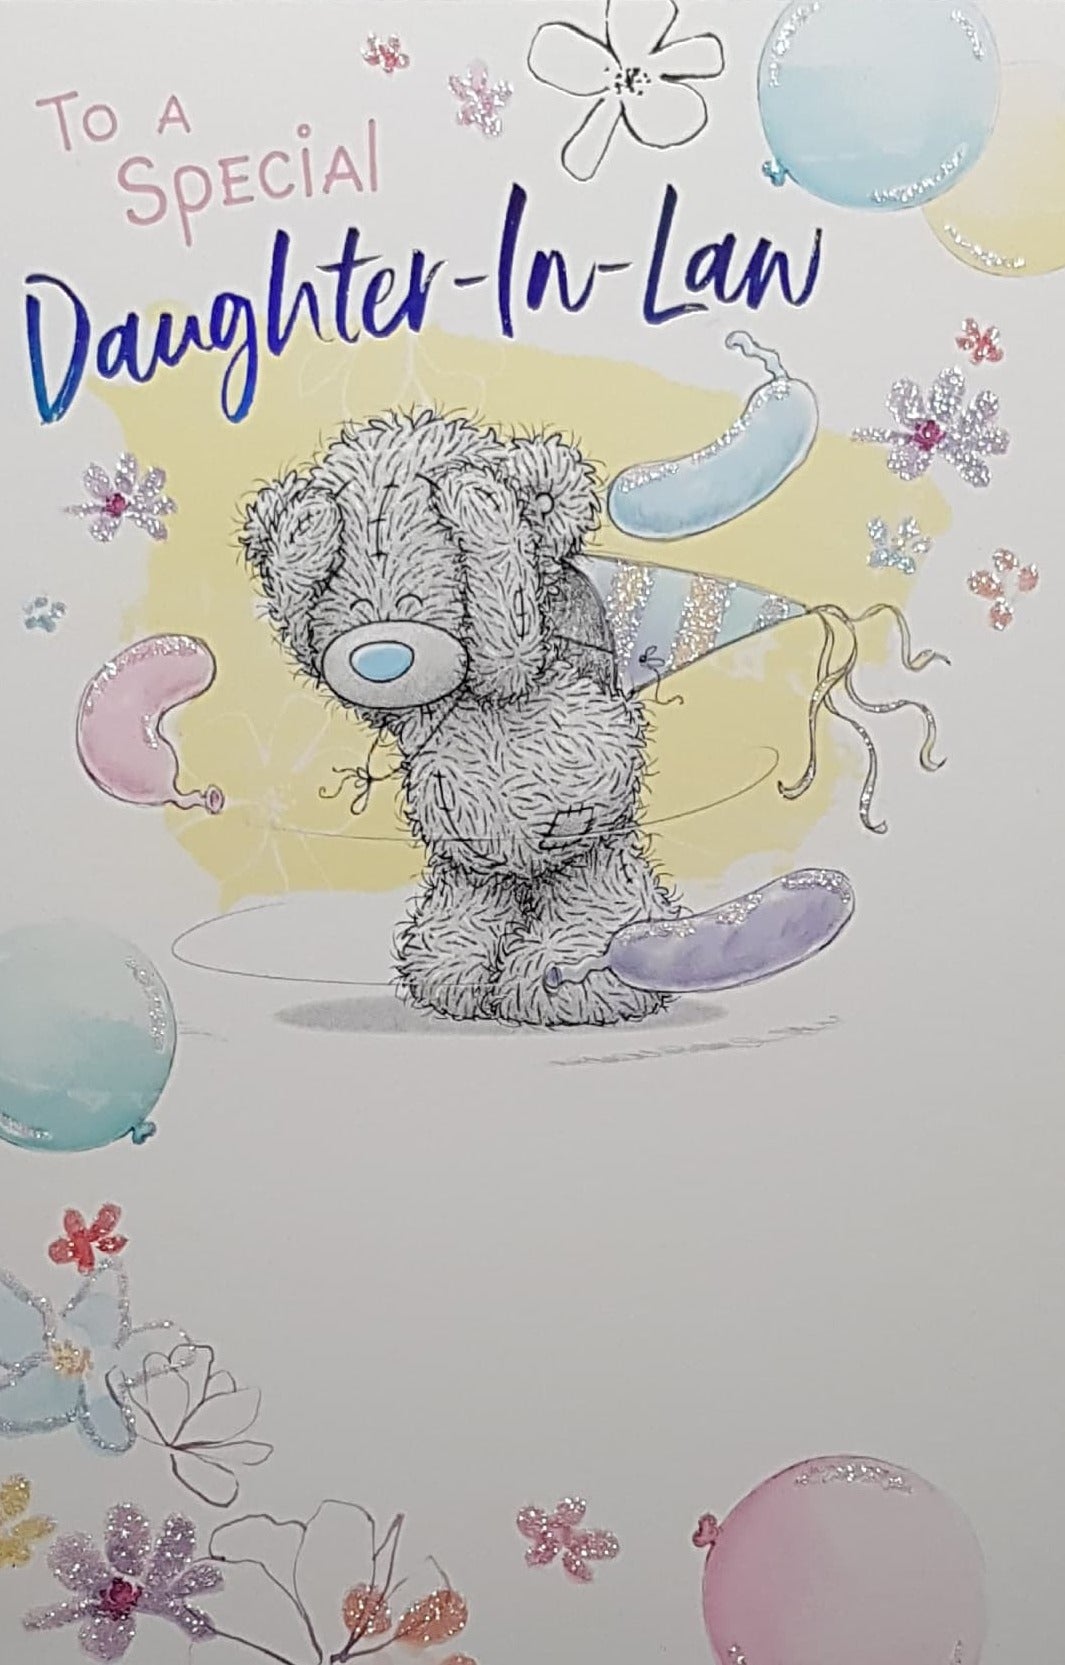 Birthday Card - Daughter In Law / Cute Teddy With A Blue Party Hat & Balloons